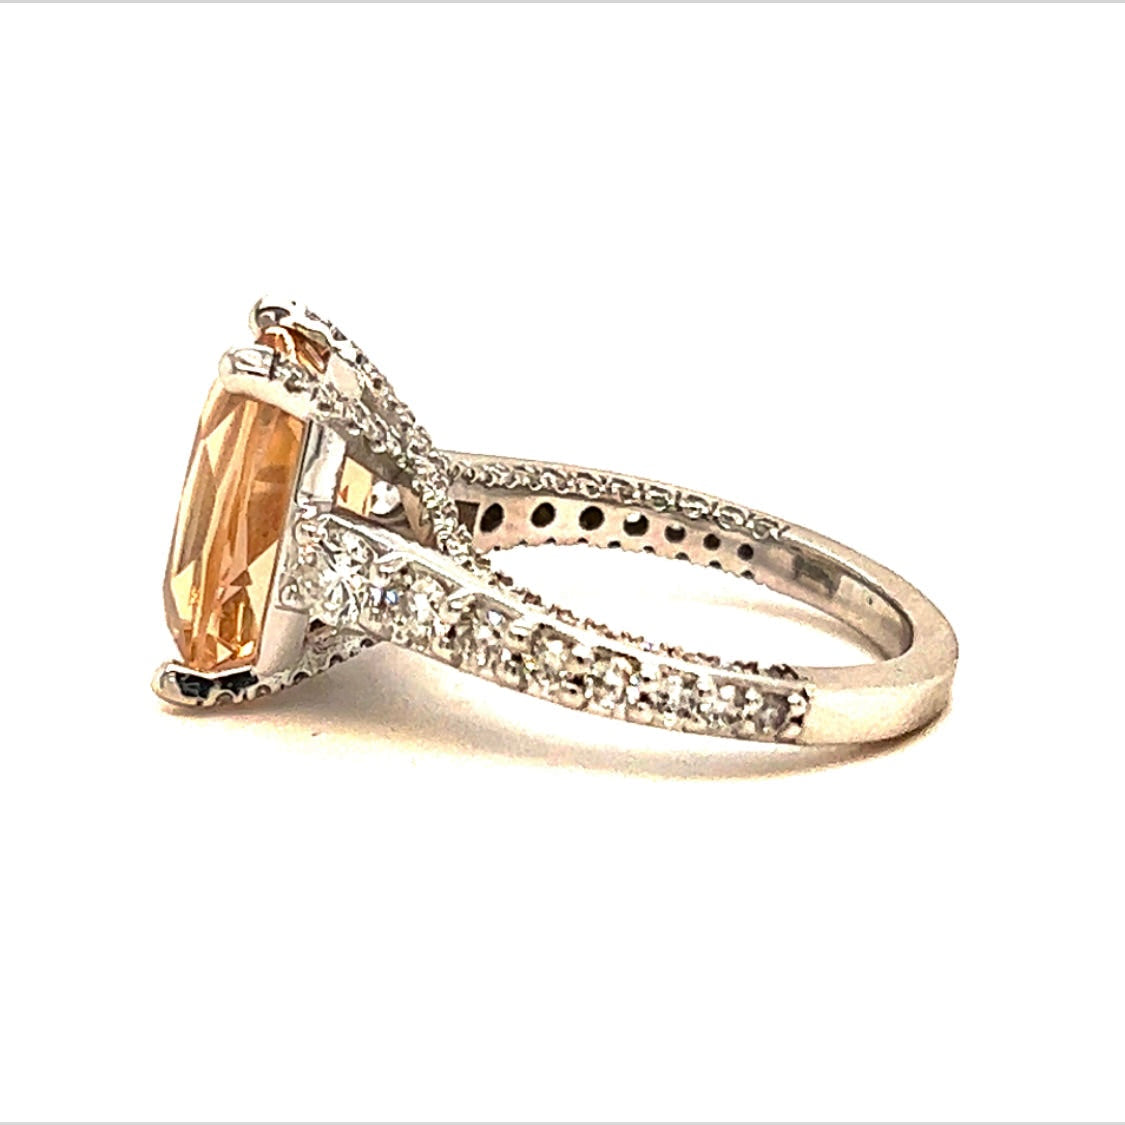 Natural Morganite Diamond Ring Size 6.25 14k Gold 5.26 TCW Certified $6,950 215089 - Certified Fine Jewelry